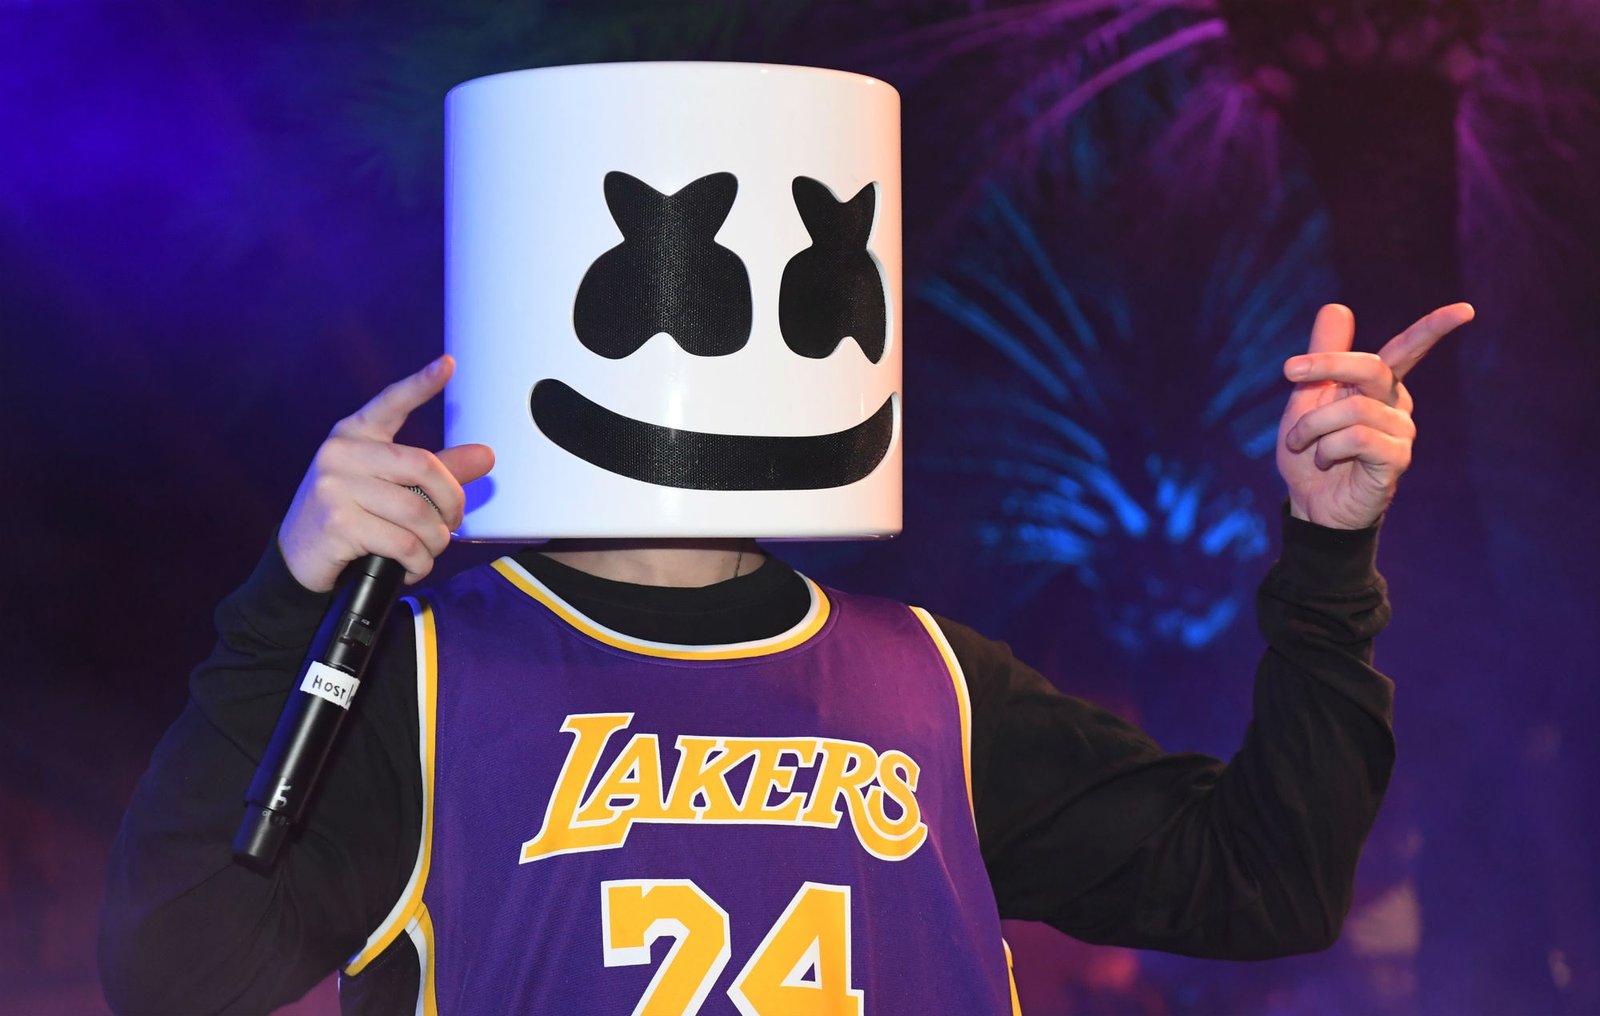 Marshmello donates $50,000 to fight racism: “Underneath this costume, I am human and this is my tipping point”